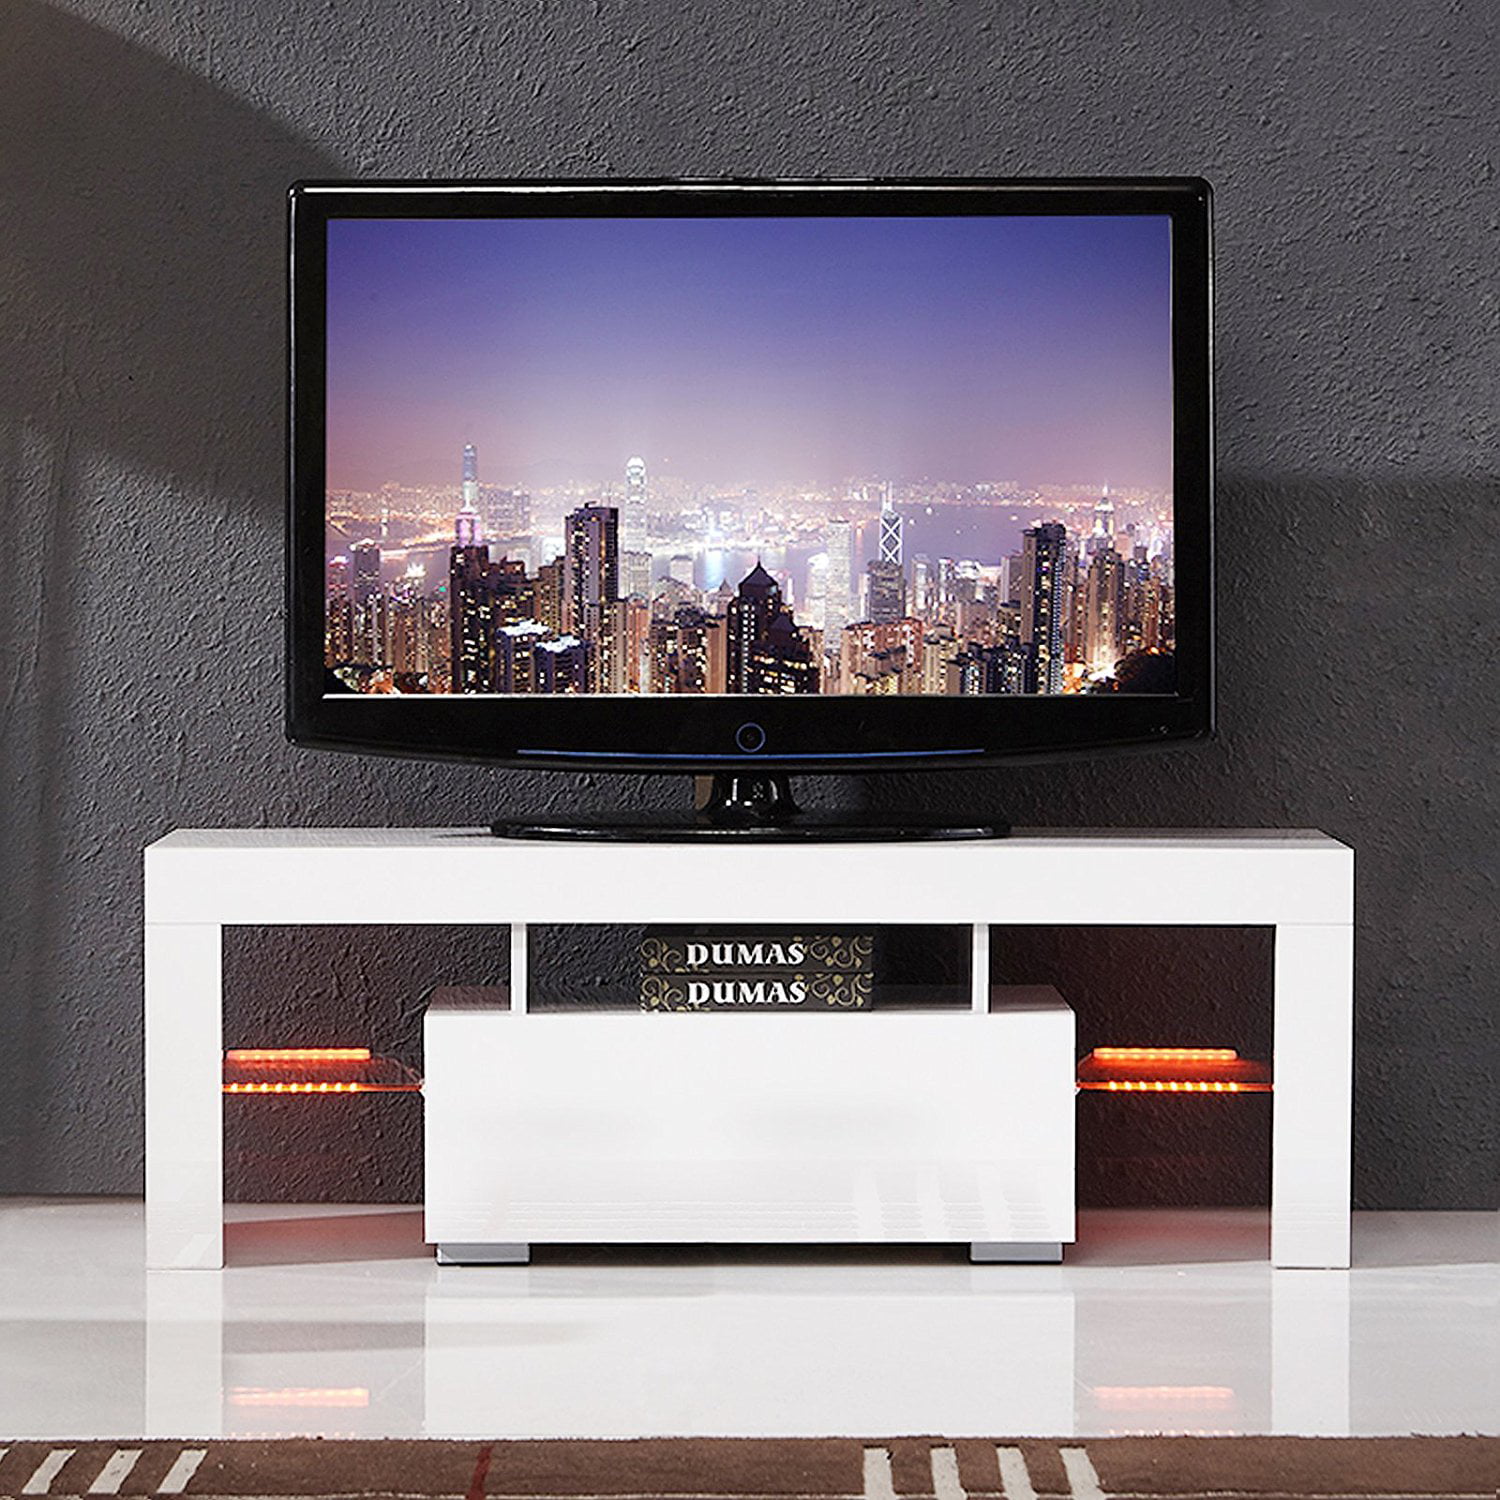 Modern LED TV Stand with Storage and Drawers High Gloss TV Stand for 65 Inch TV Living Room Furniture mecor White TV Stand with Lights